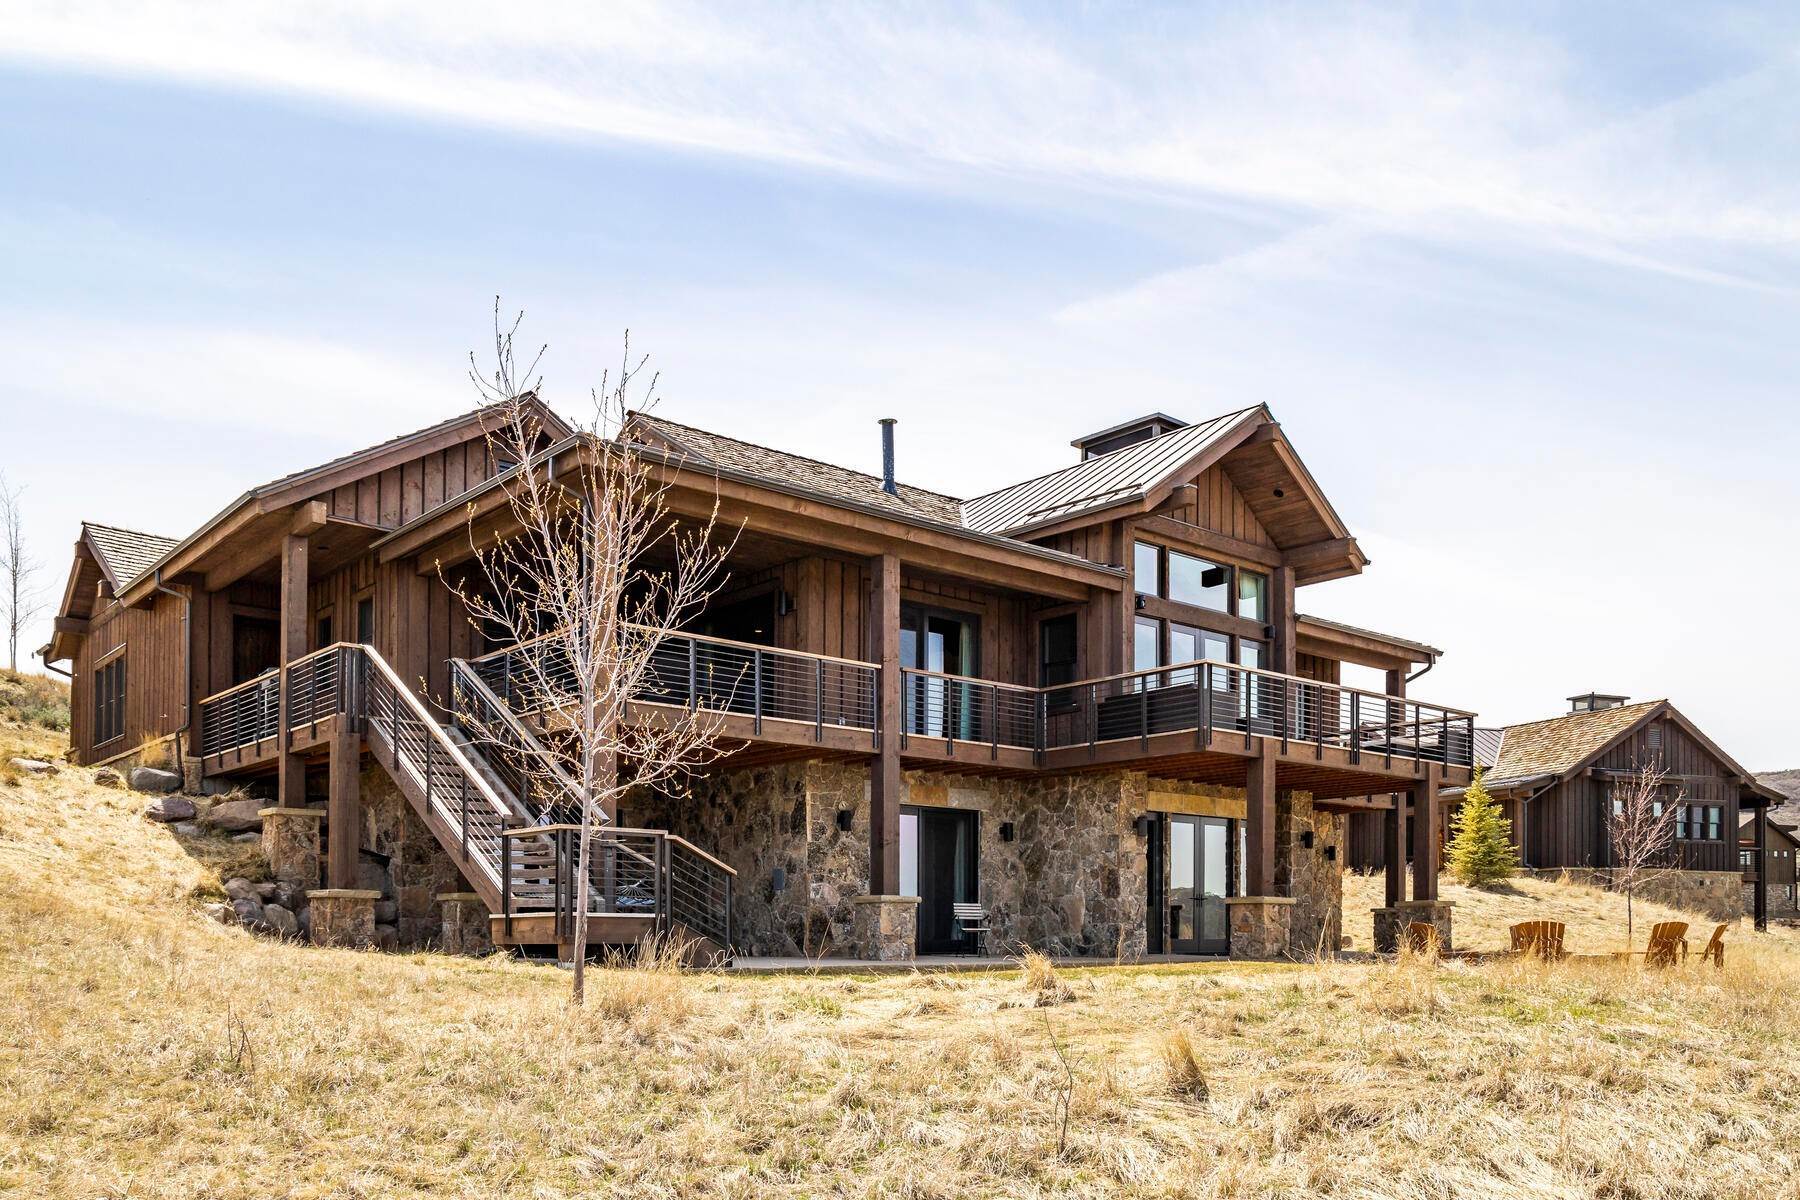 Single Family Homes for Sale at The Popular Juniper Cabin at Victory Ranch with just the Right Views! 6625 E Moon Light Dr Heber City, Utah 84032 United States